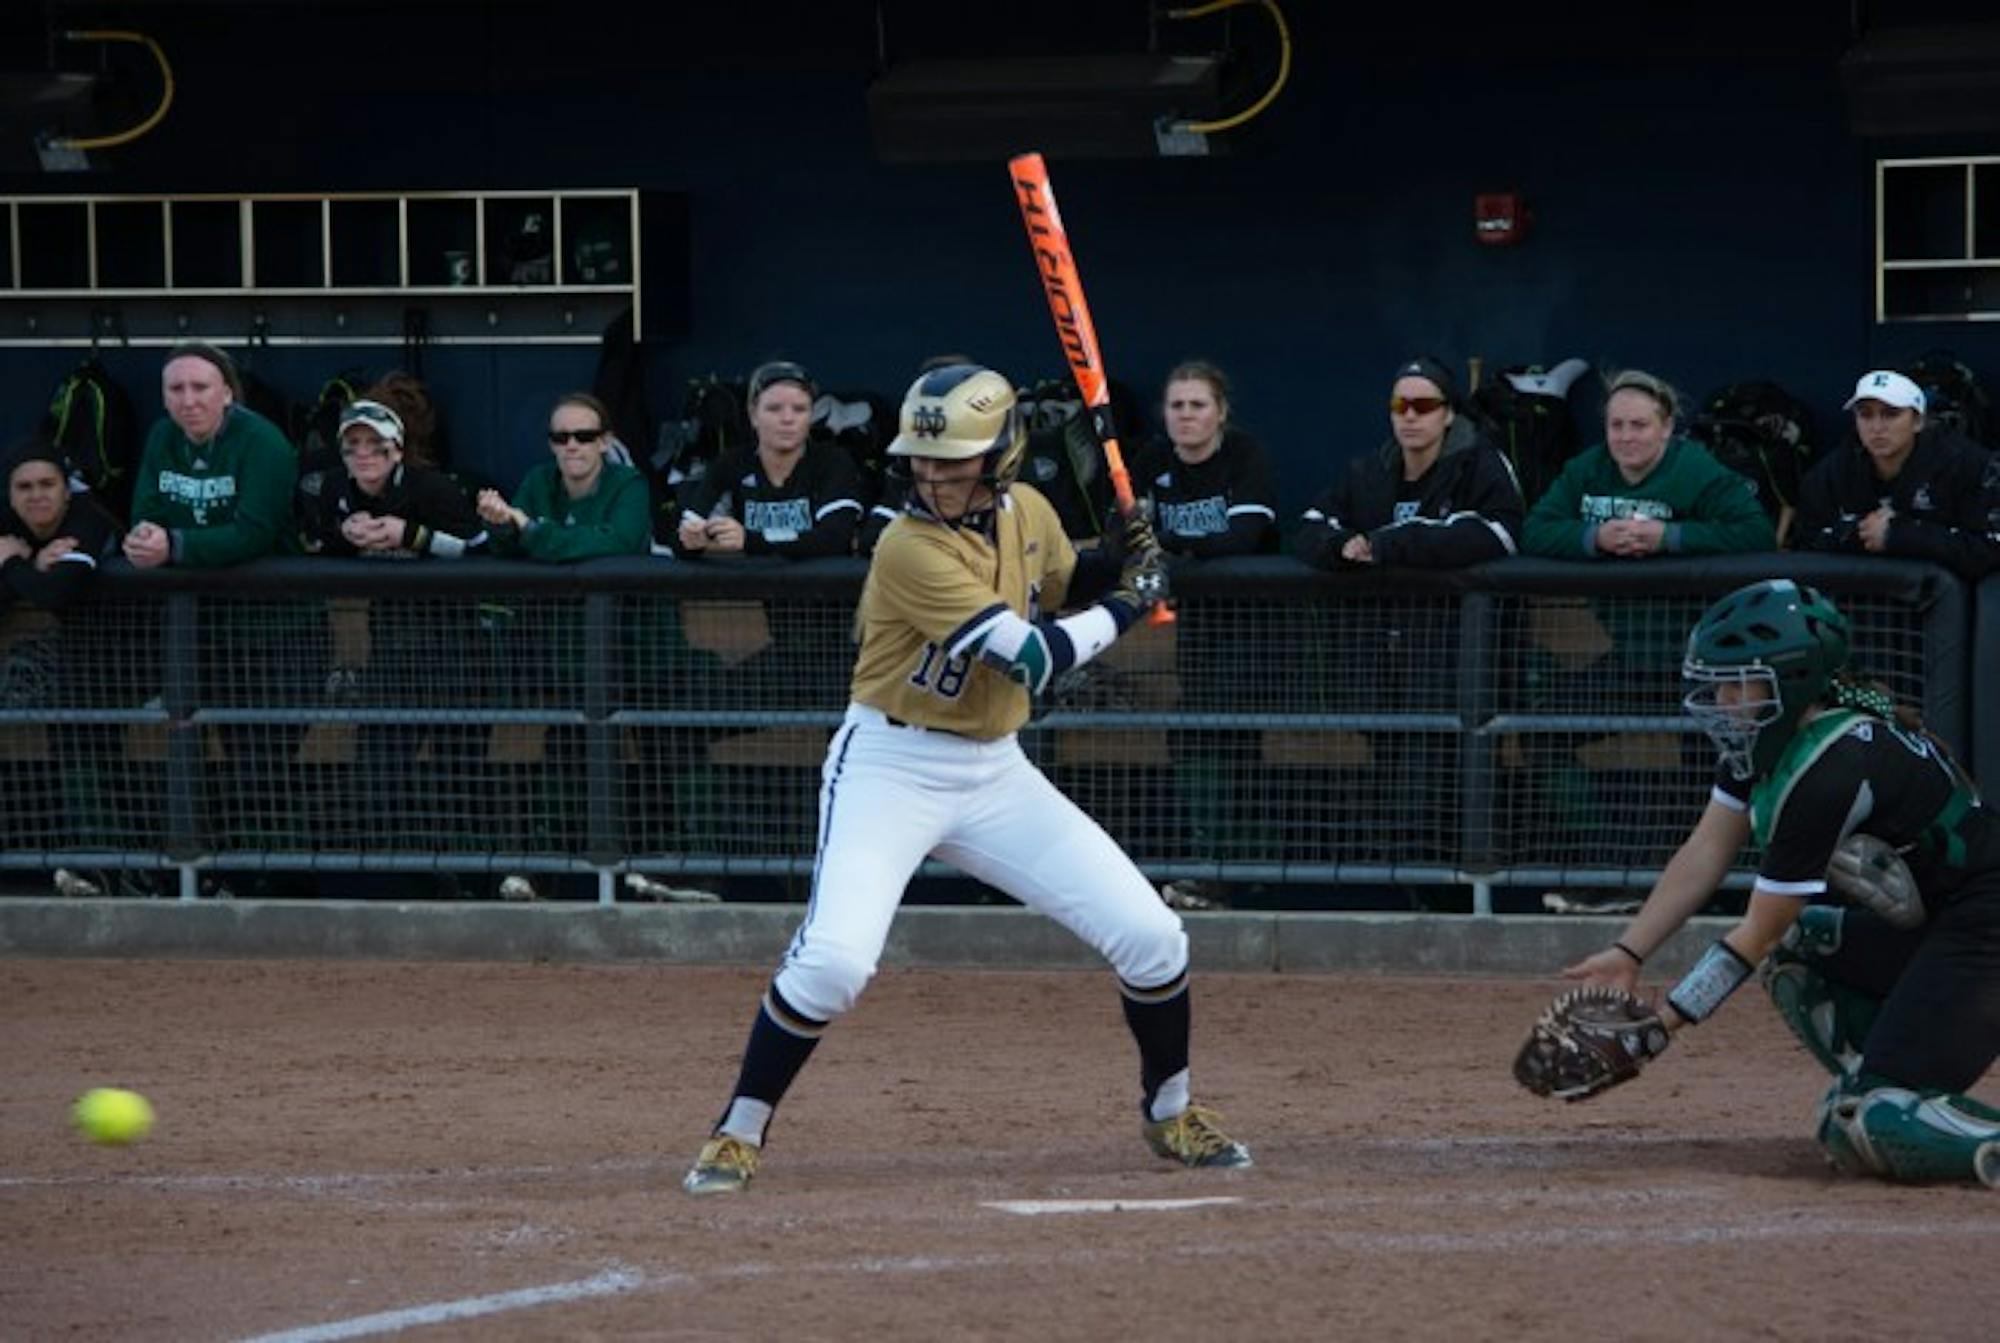 Sophomore left fielder Bailey Bigler awaits a pitch during a 10-2 win over Eastern Michigan on March 22 at Melissa Cook Stadium.